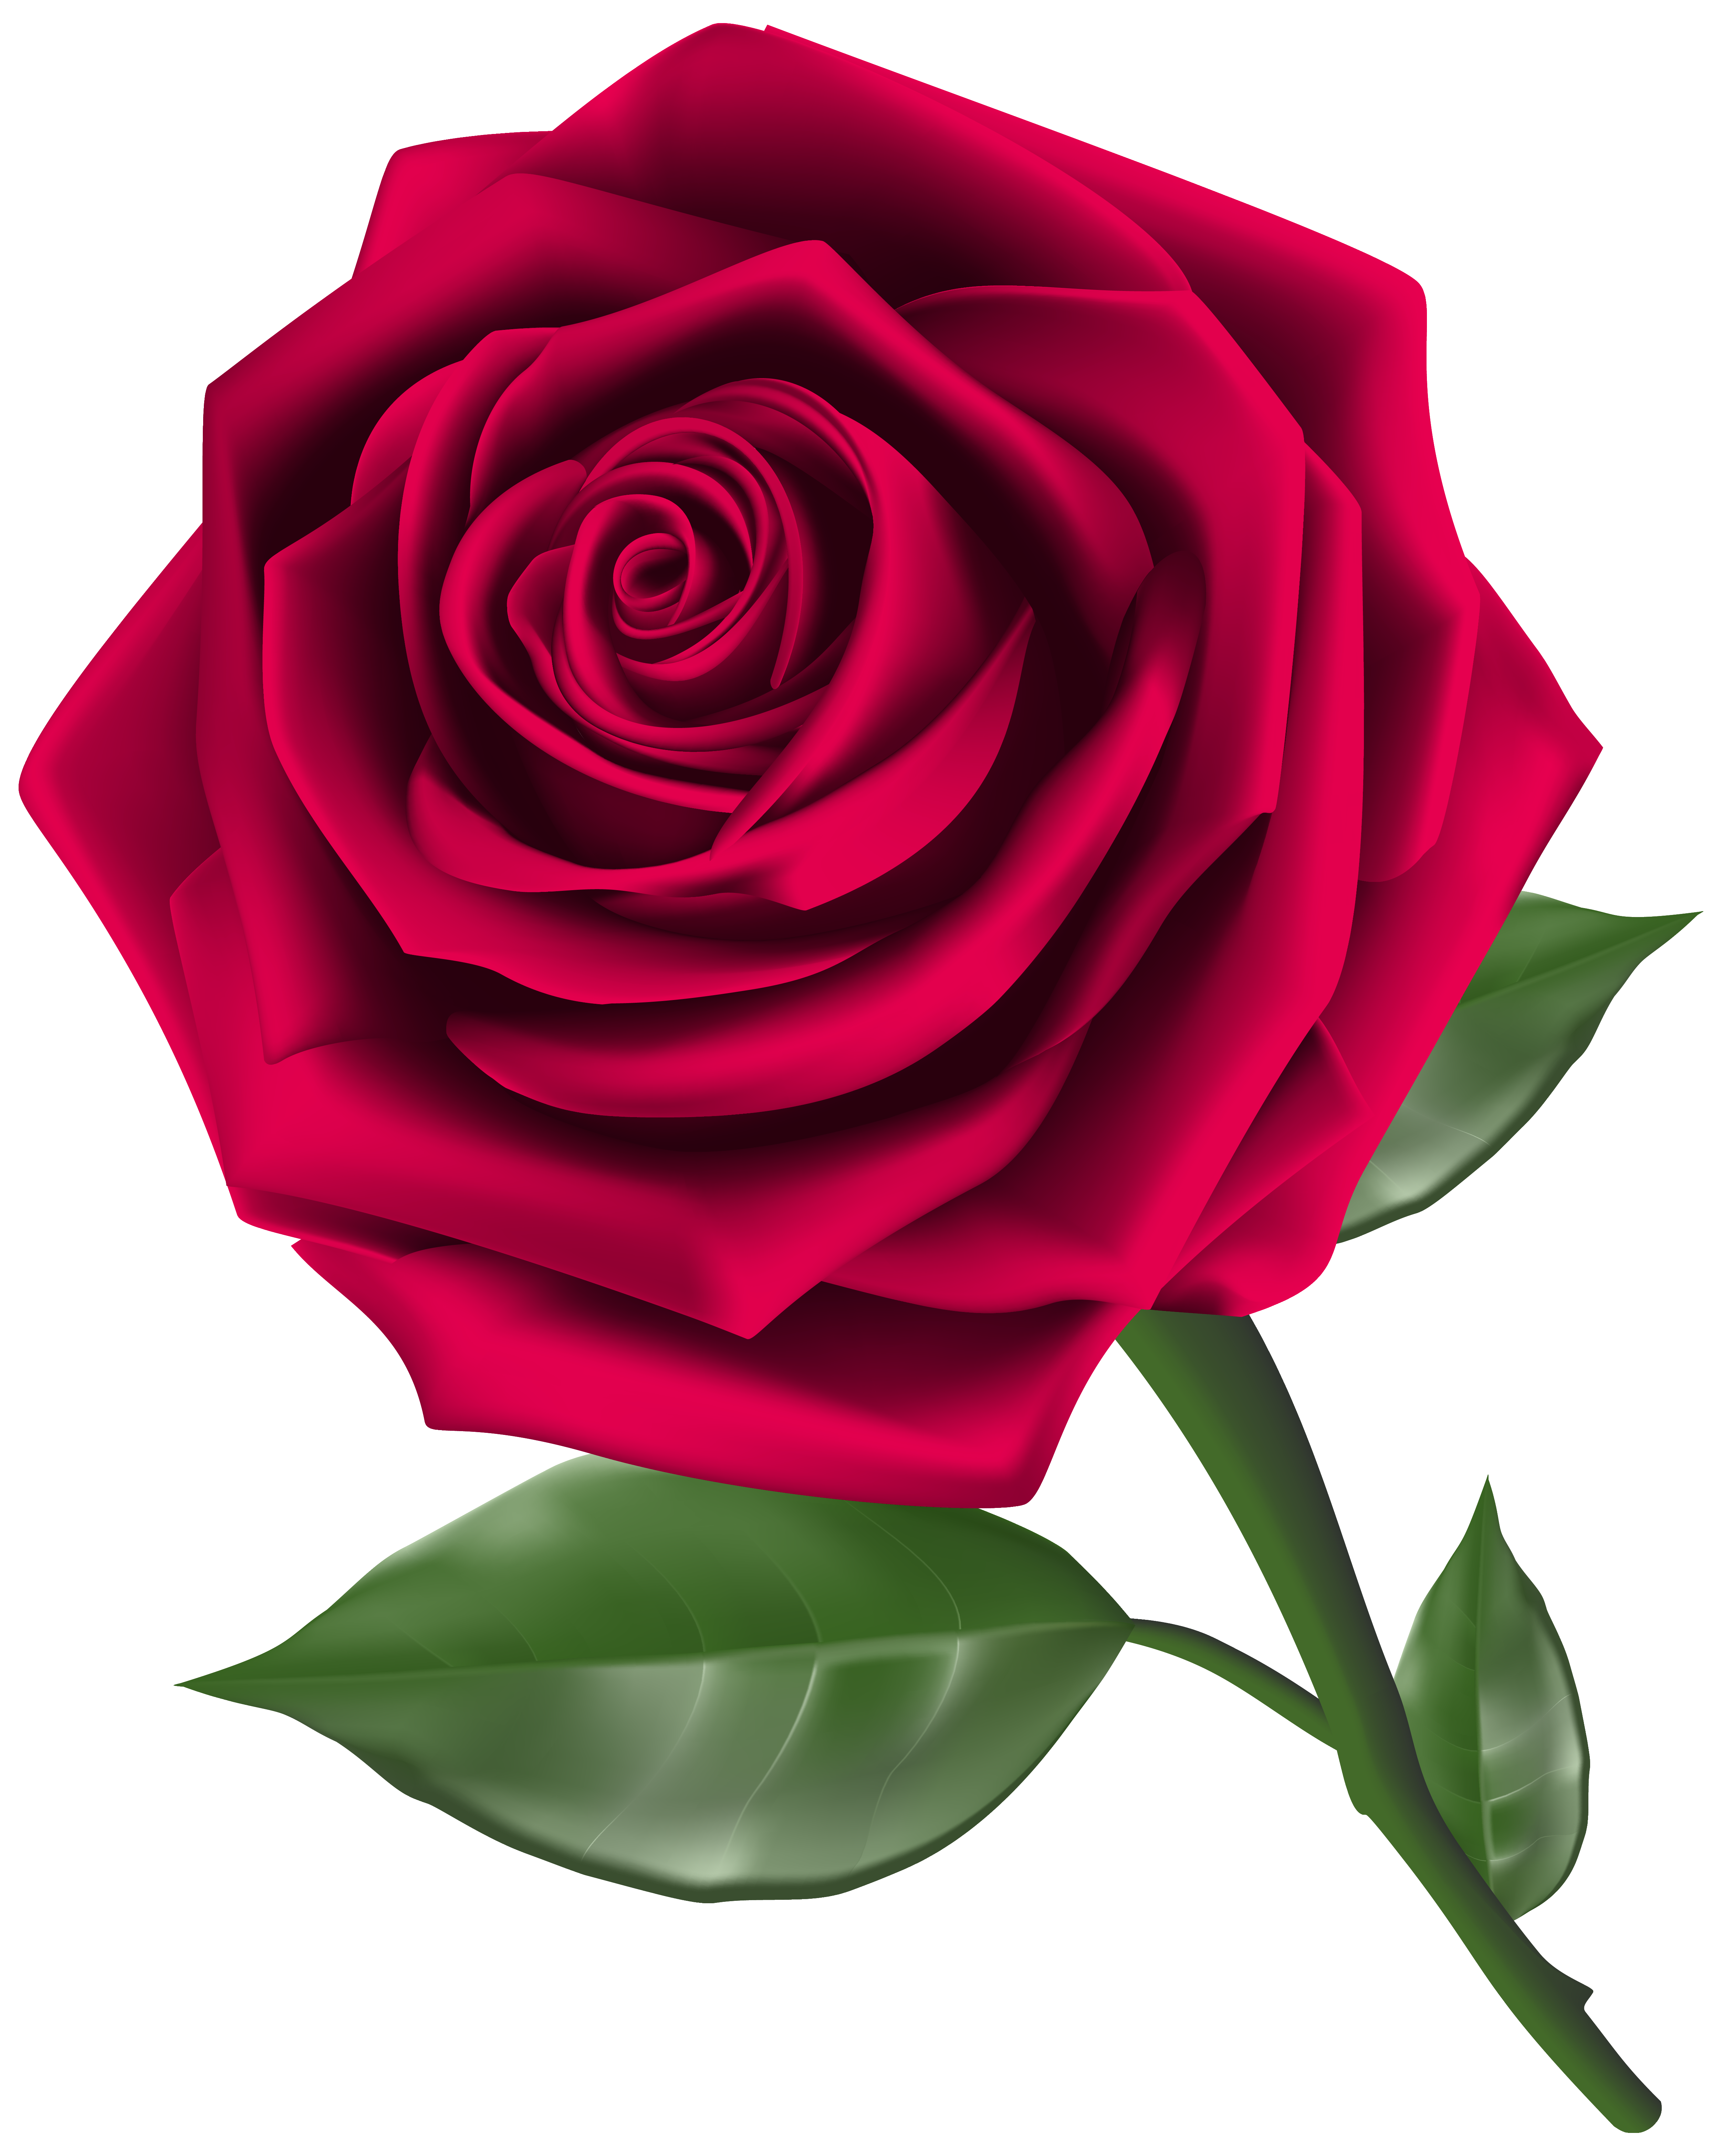 Clip art roses with thorns and dead vines free 2 - Clipartix